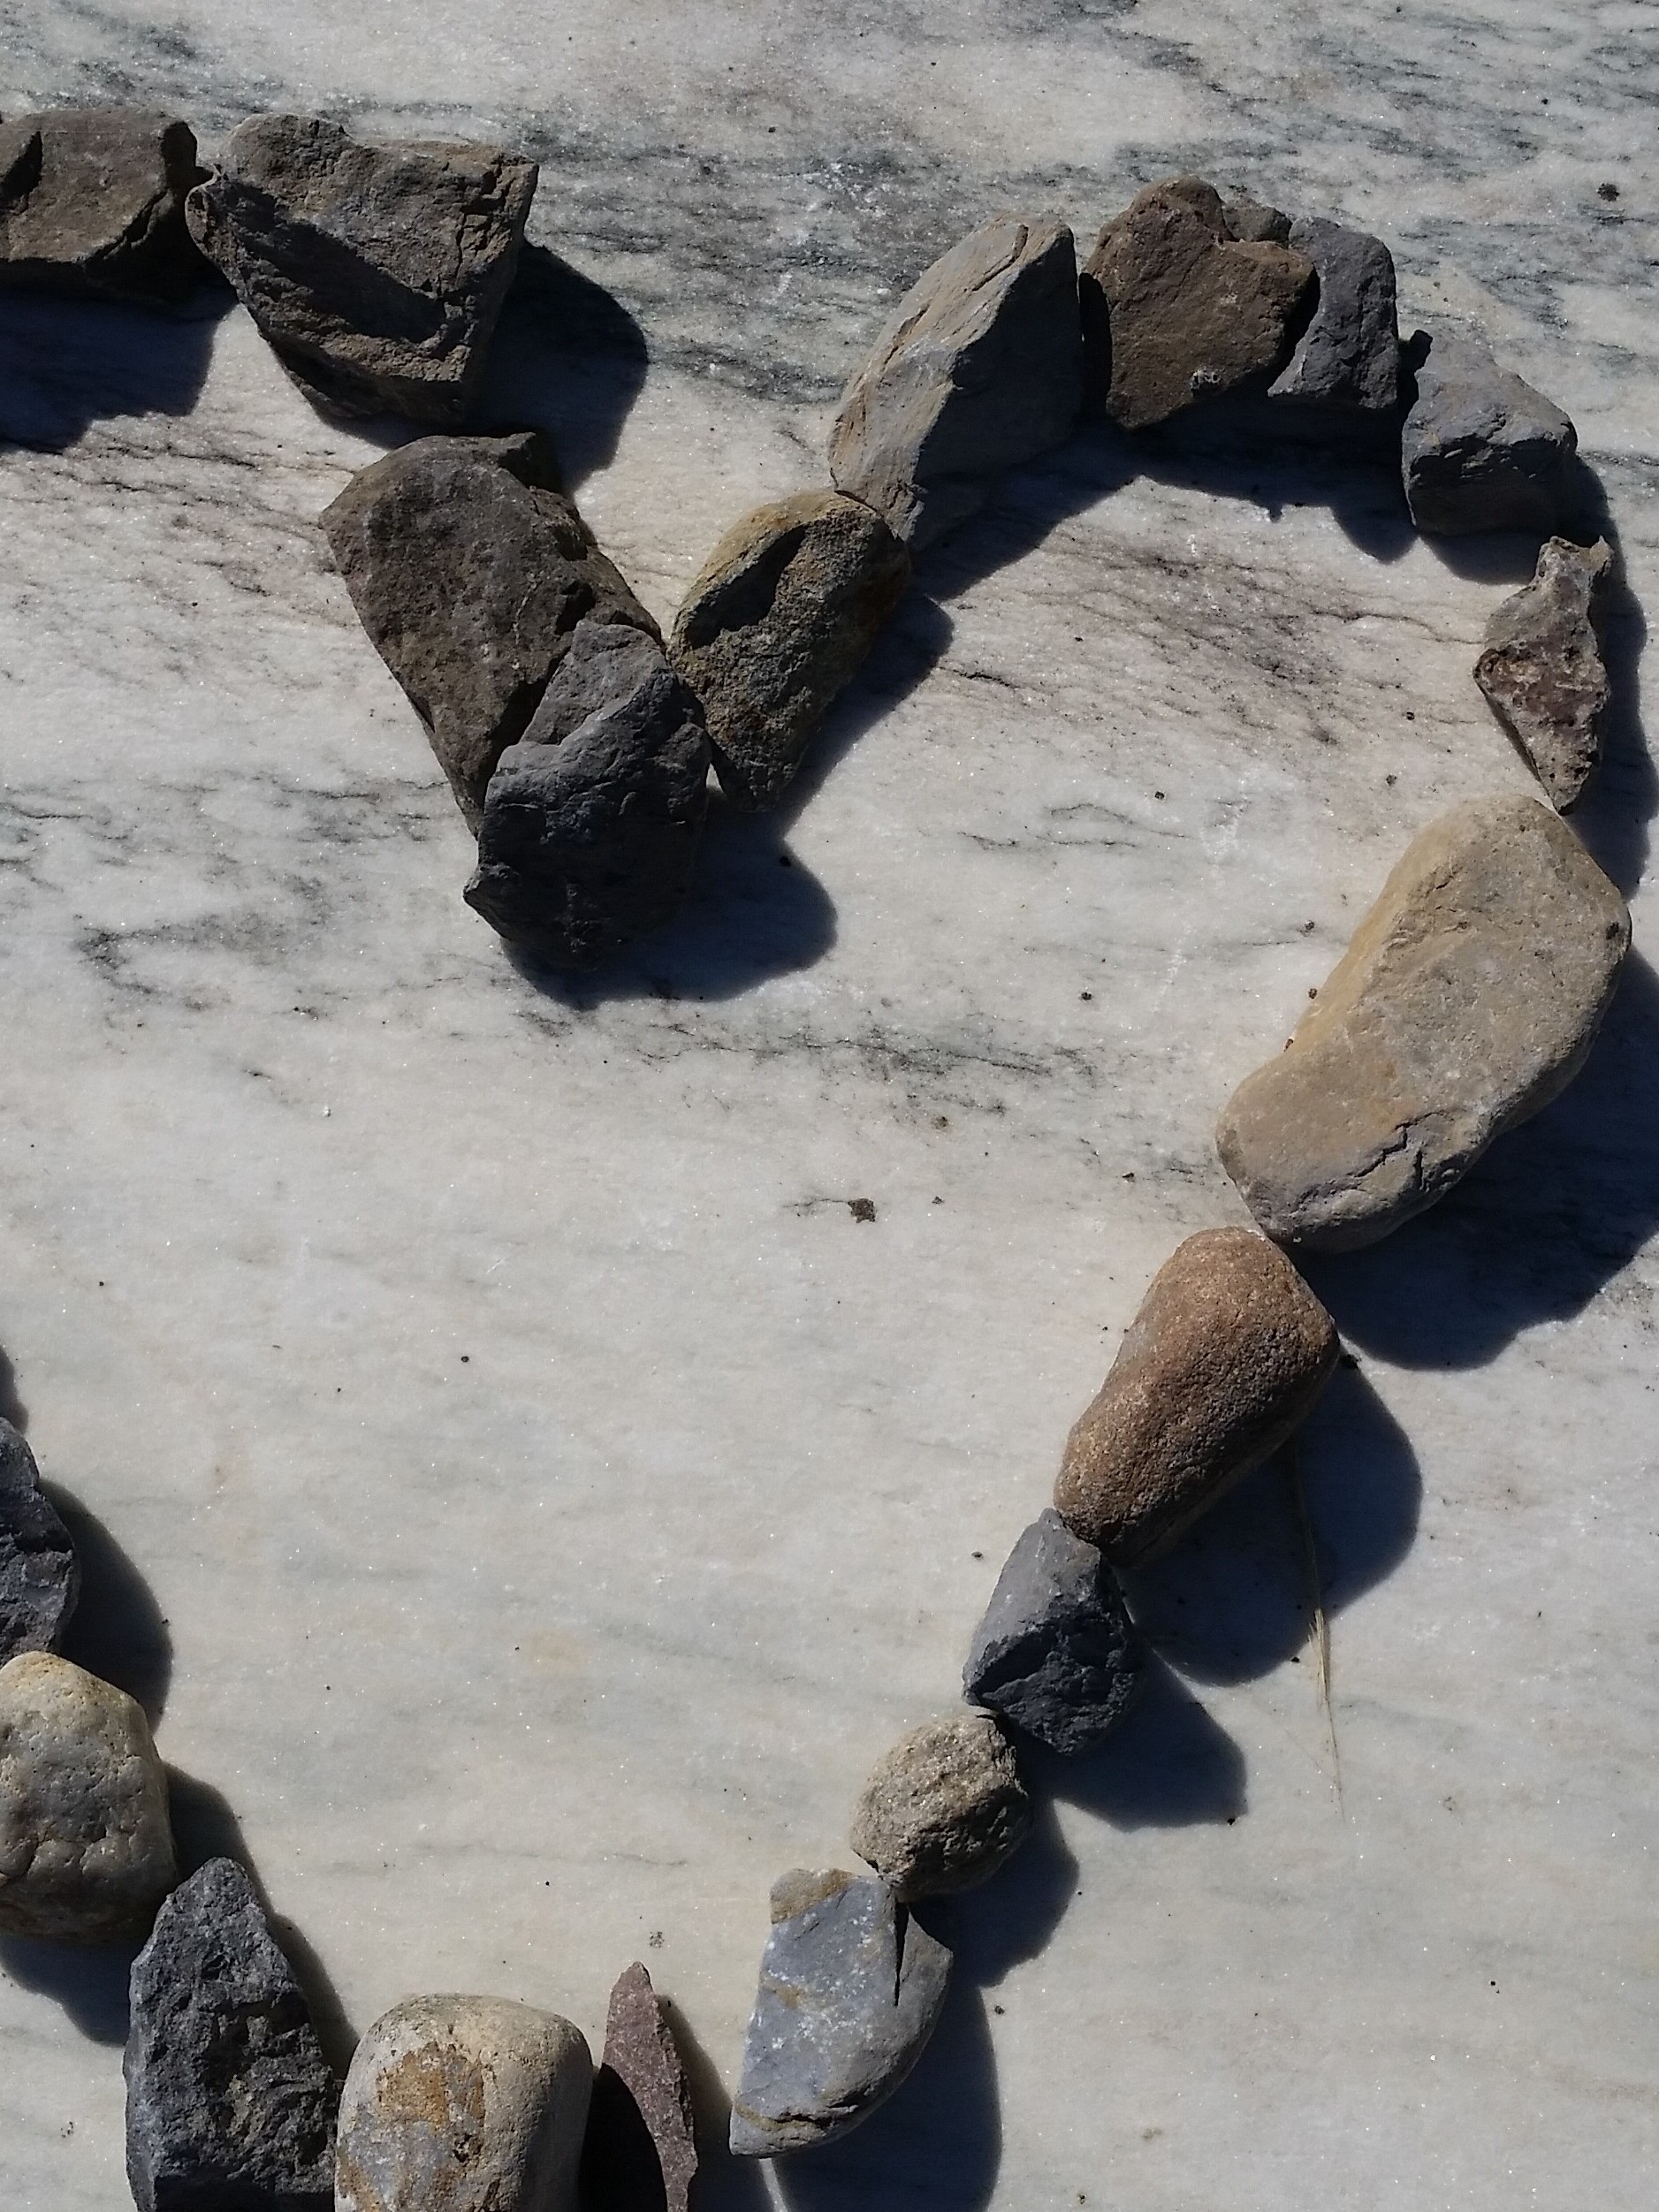 Rocks positioned in the shape of a heart